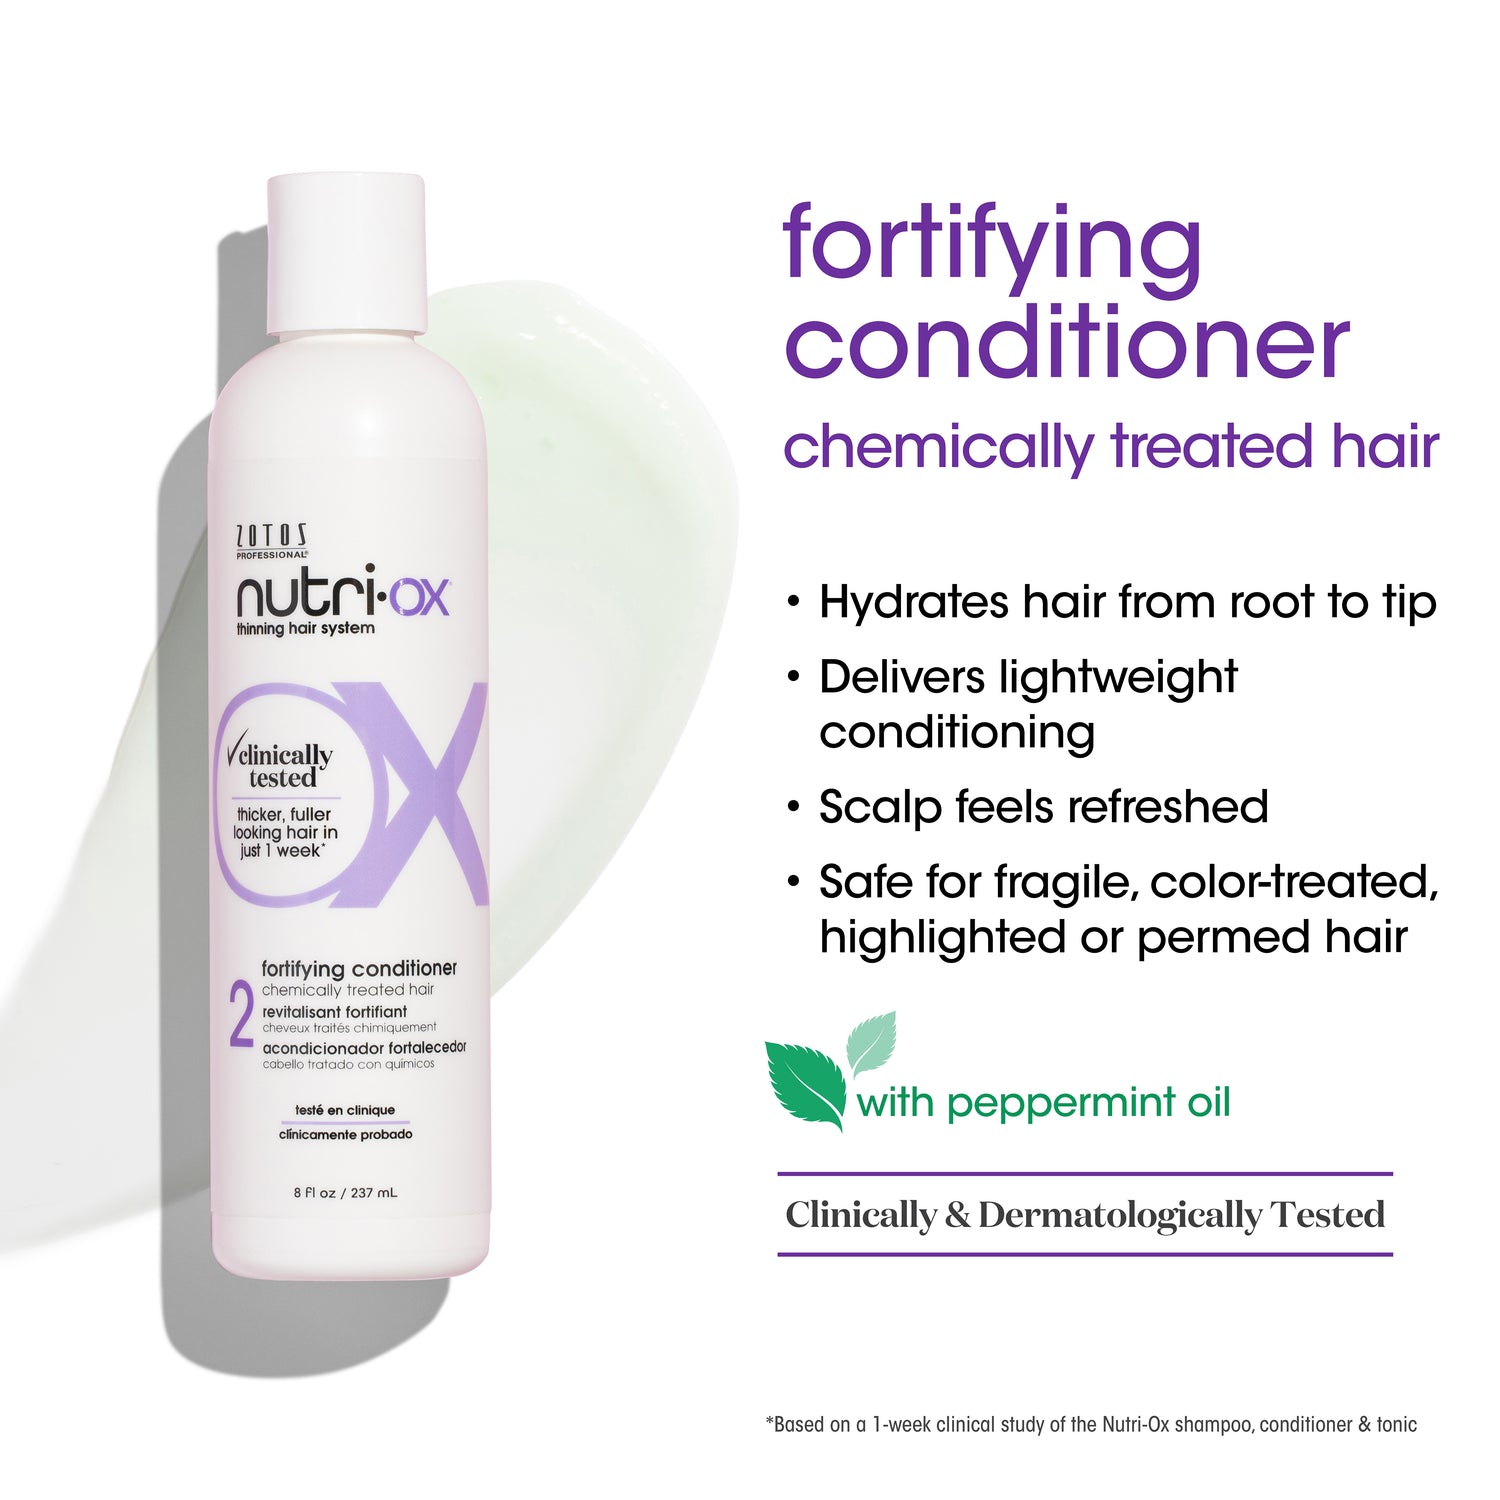 Fortifying conditioner for chemically treated hair. It hydrates hair from root to tip, delivers lightweight conditioning, scalp feels refreshed, safe for fragile, color-treated, highlighted or permed hair.